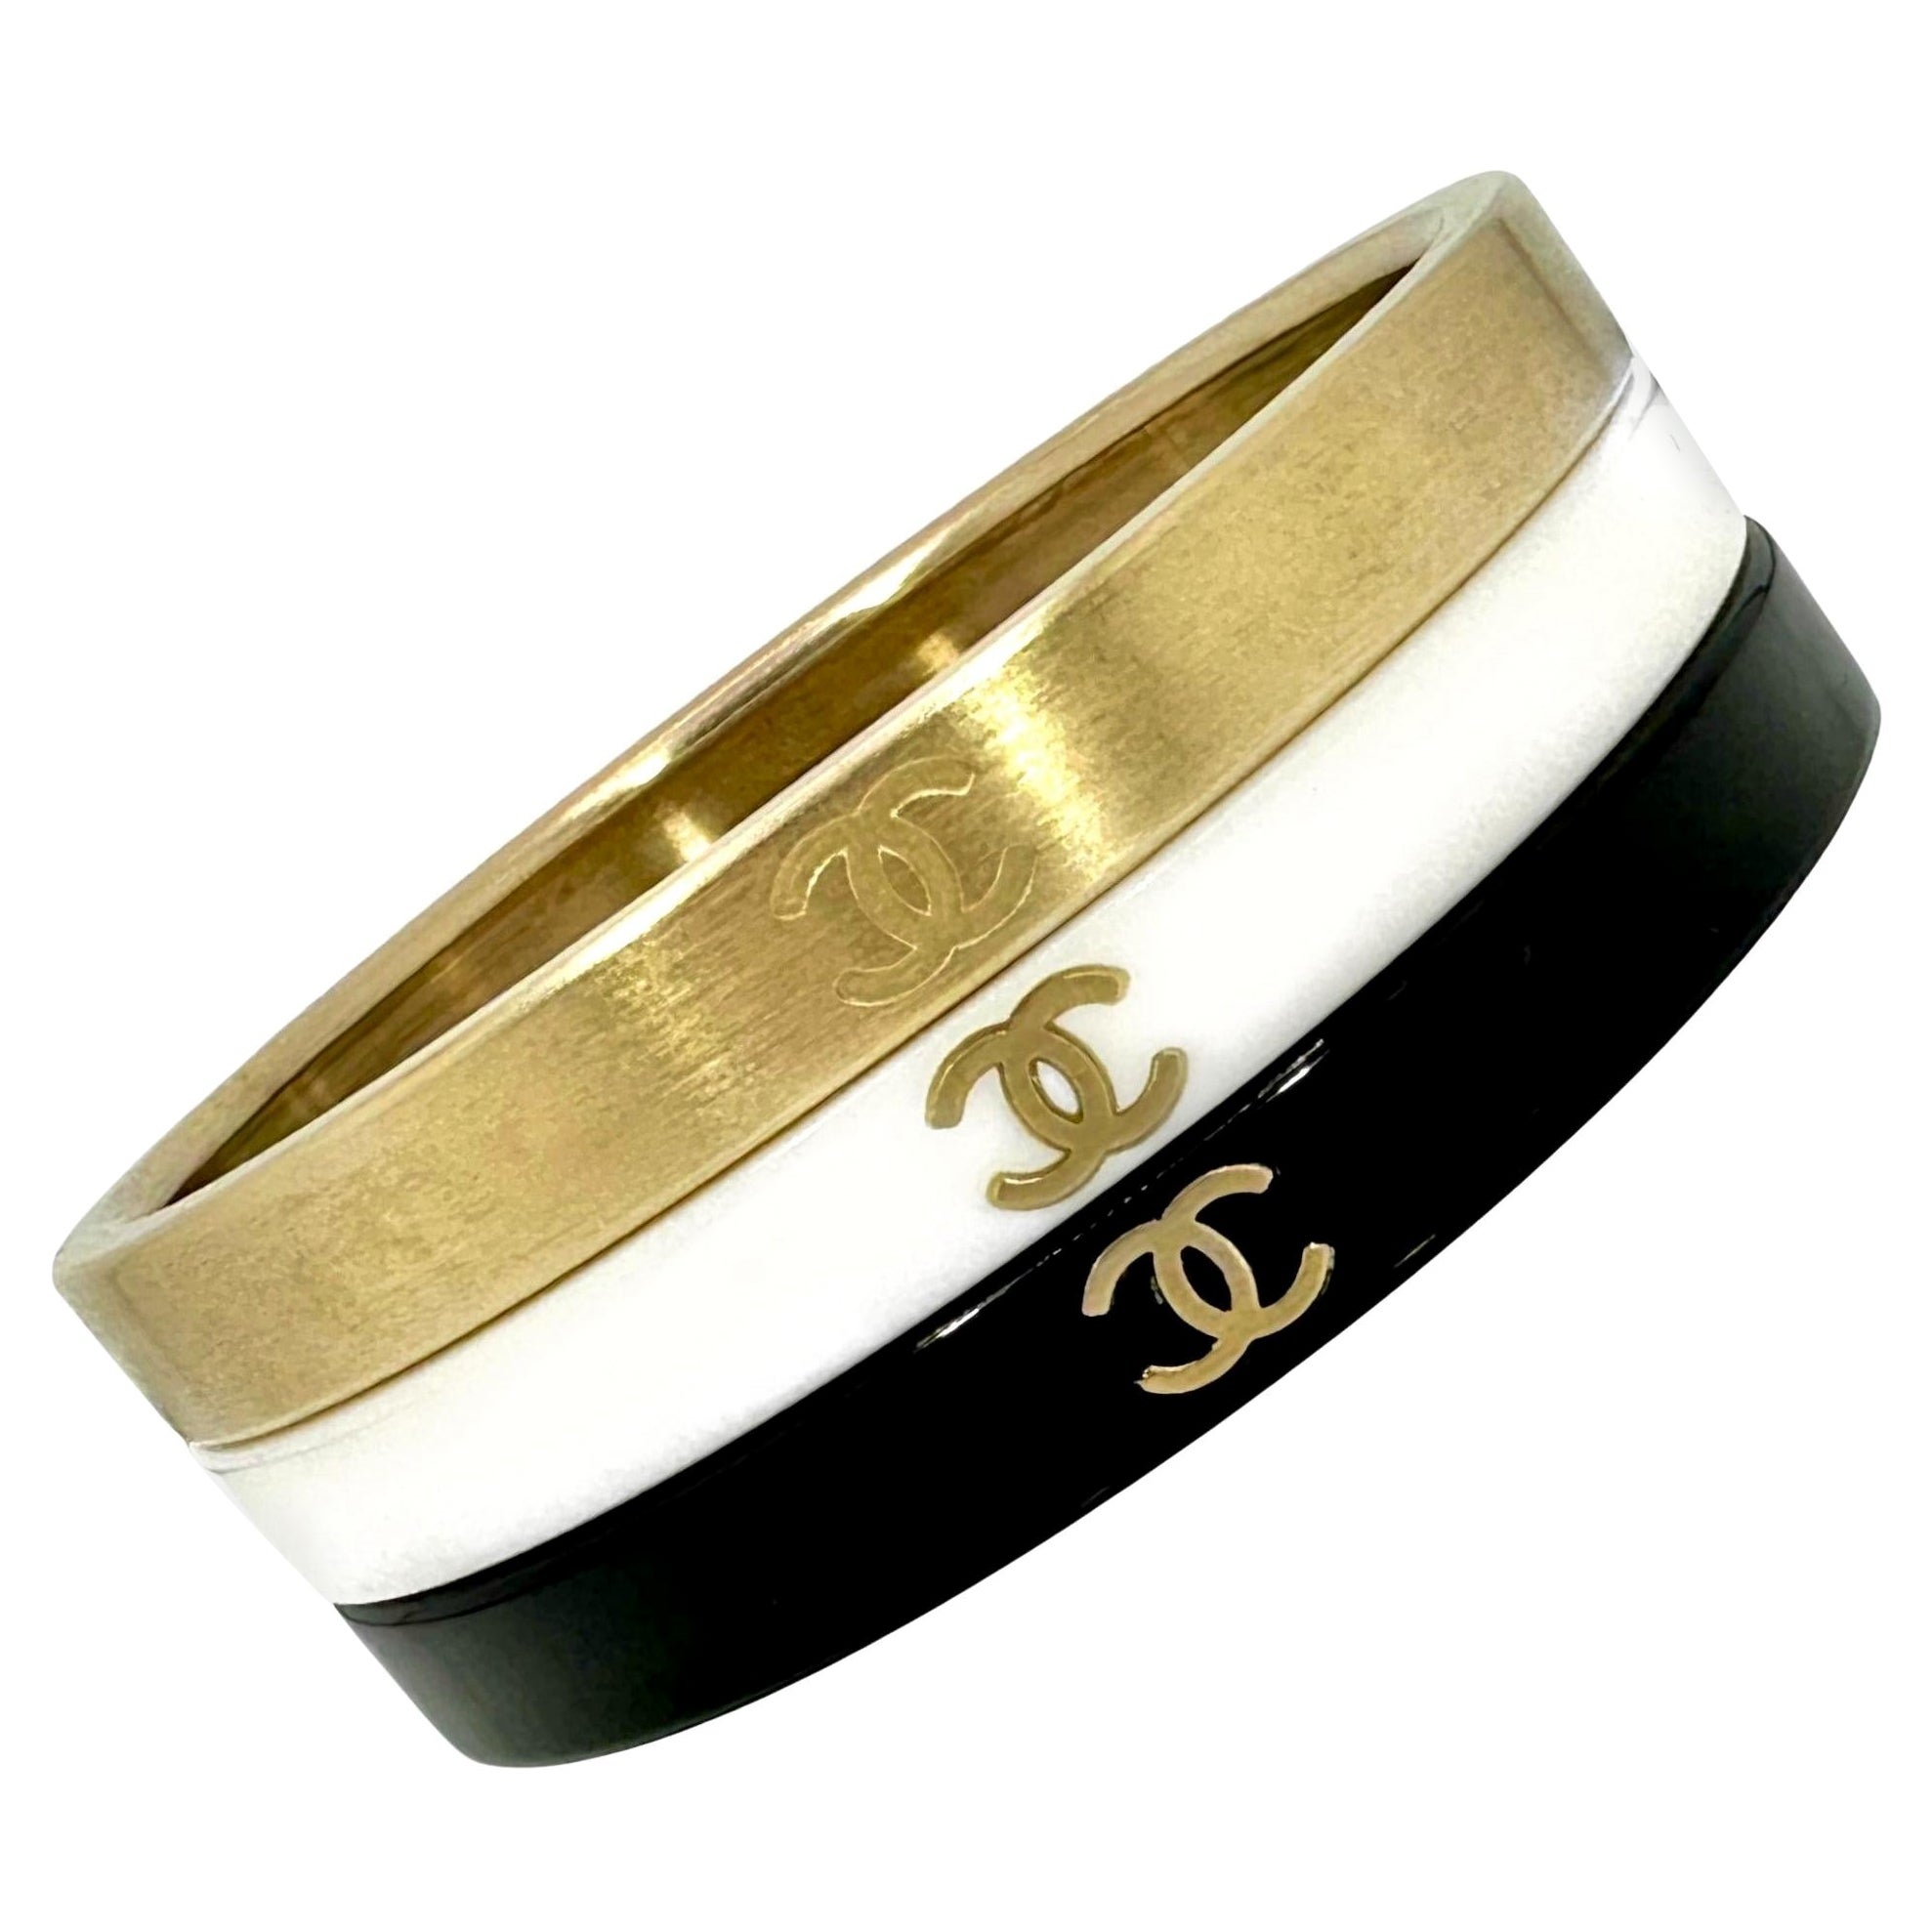 Vintage Chanel Bangle Set of 3: In Gold Tone, White, and Black